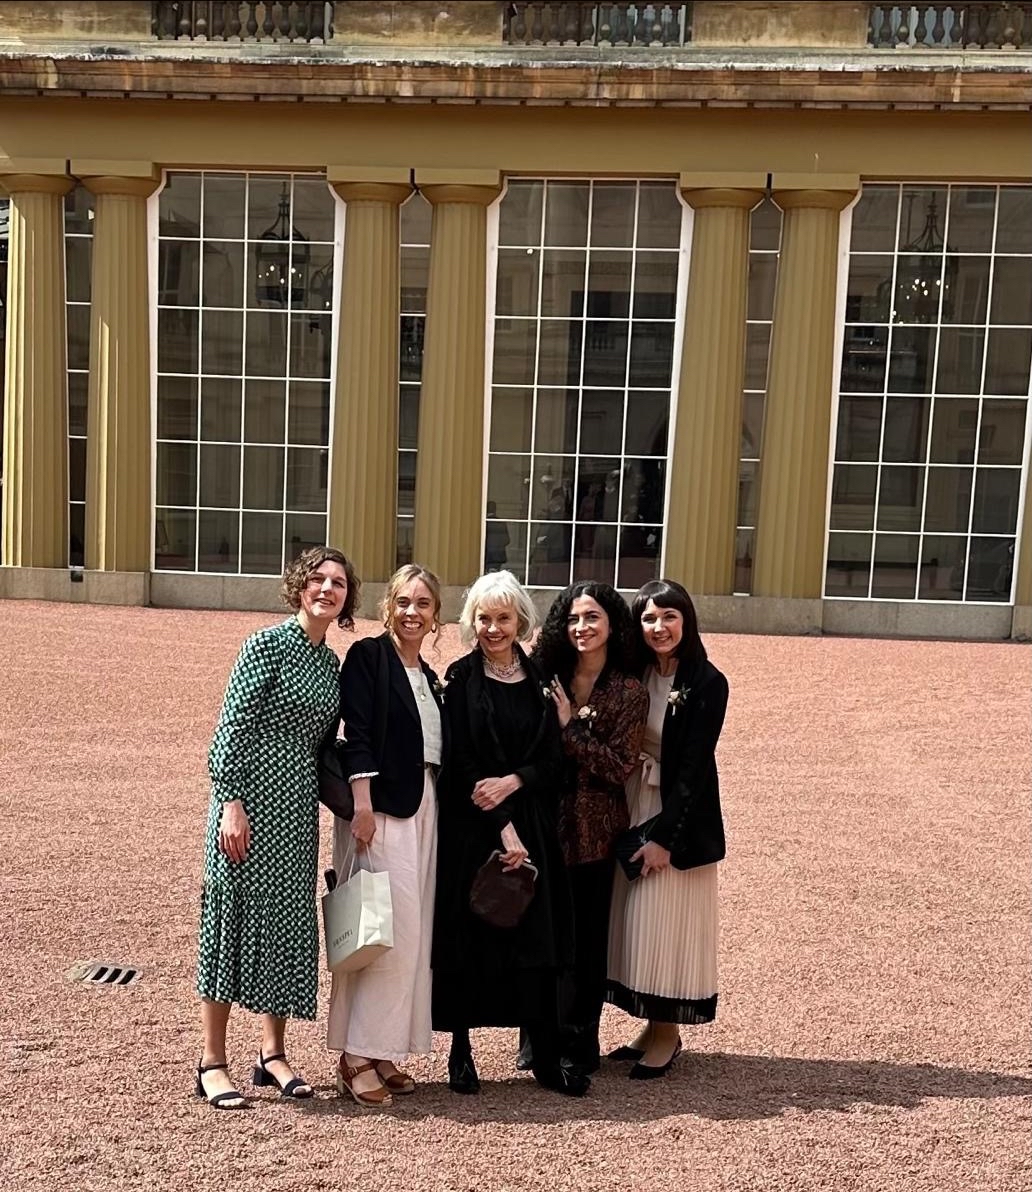 Live from the Palace! Dame Ruth is receiving her honour today at the Investiture Ceremony at Buckingham Palace - we couldn't be more proud at Ruth Miskin Training!